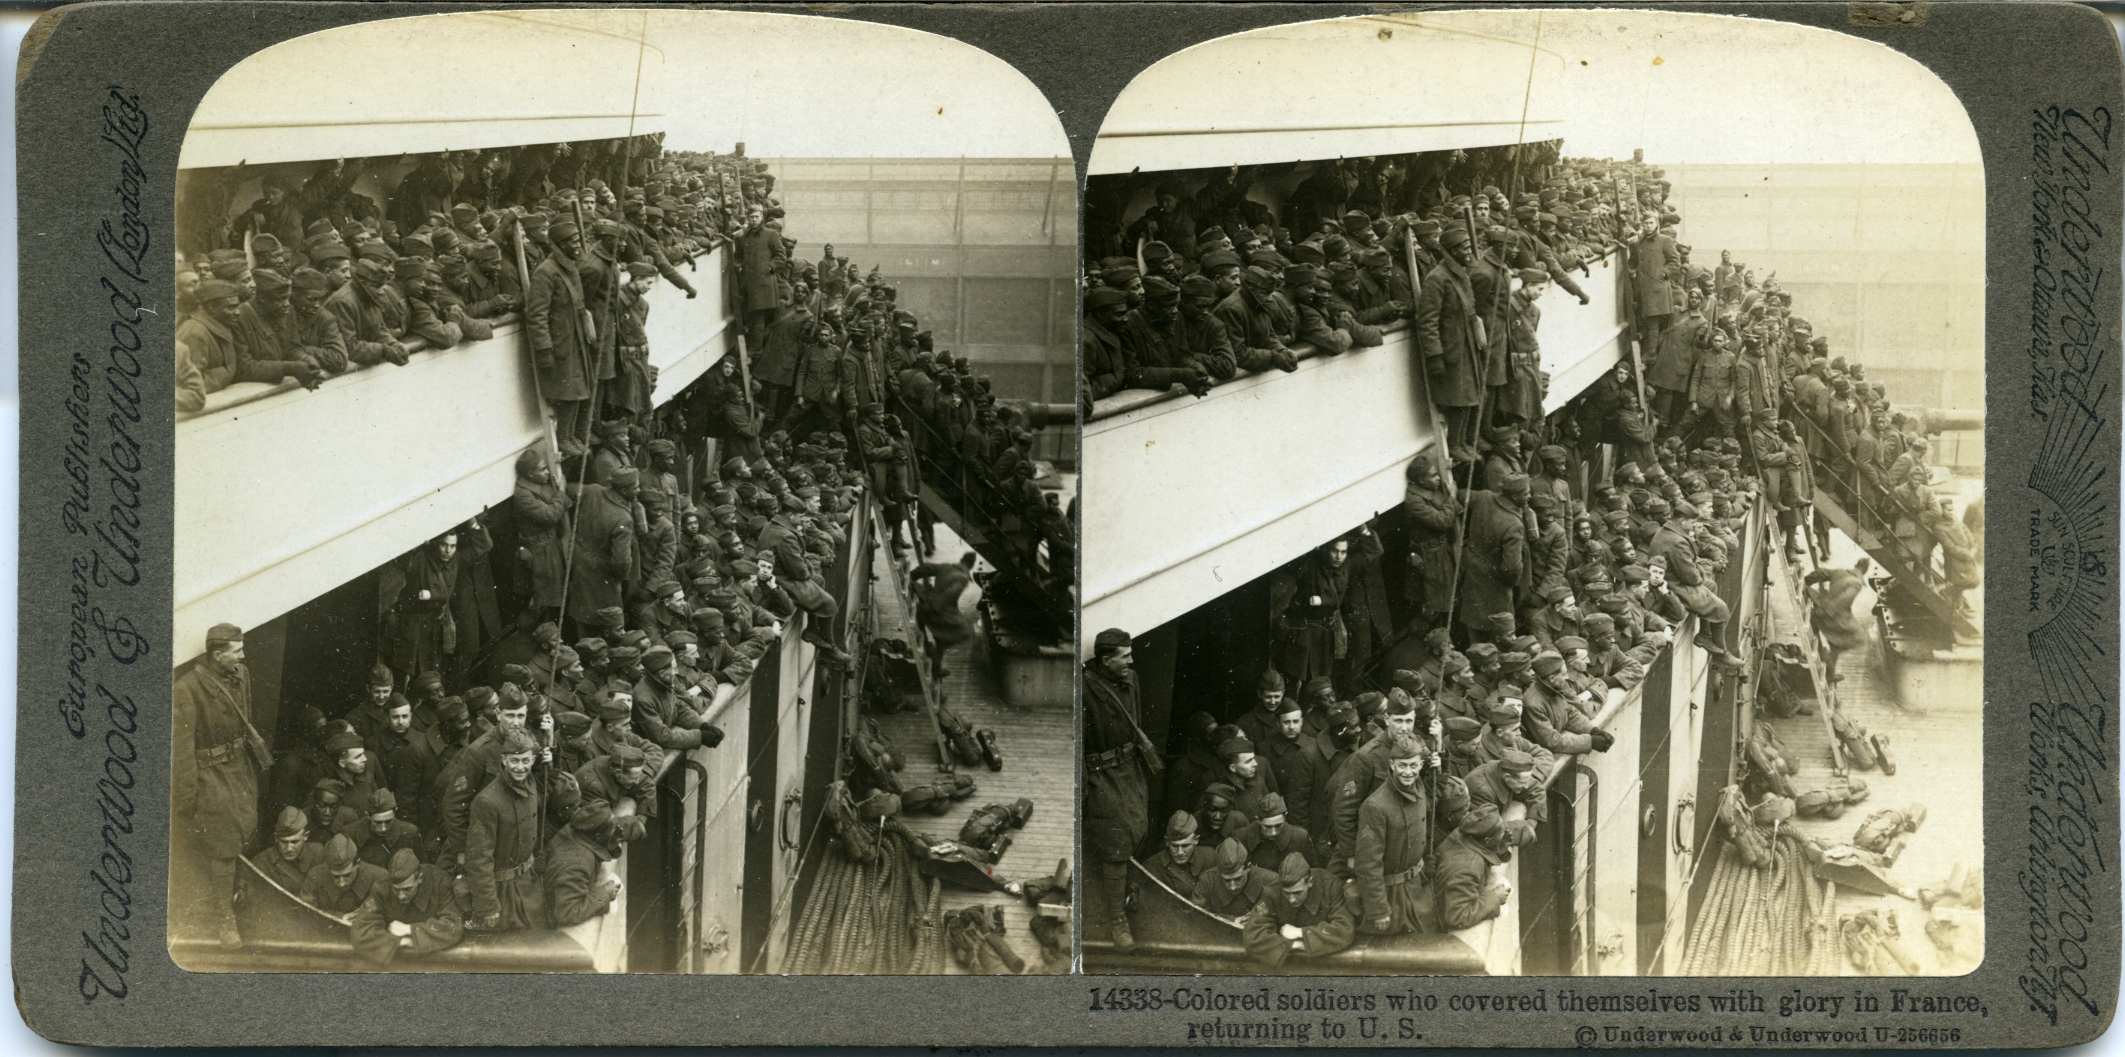 Colored soldiers who covered themselves with glory in France, returning to U.S.